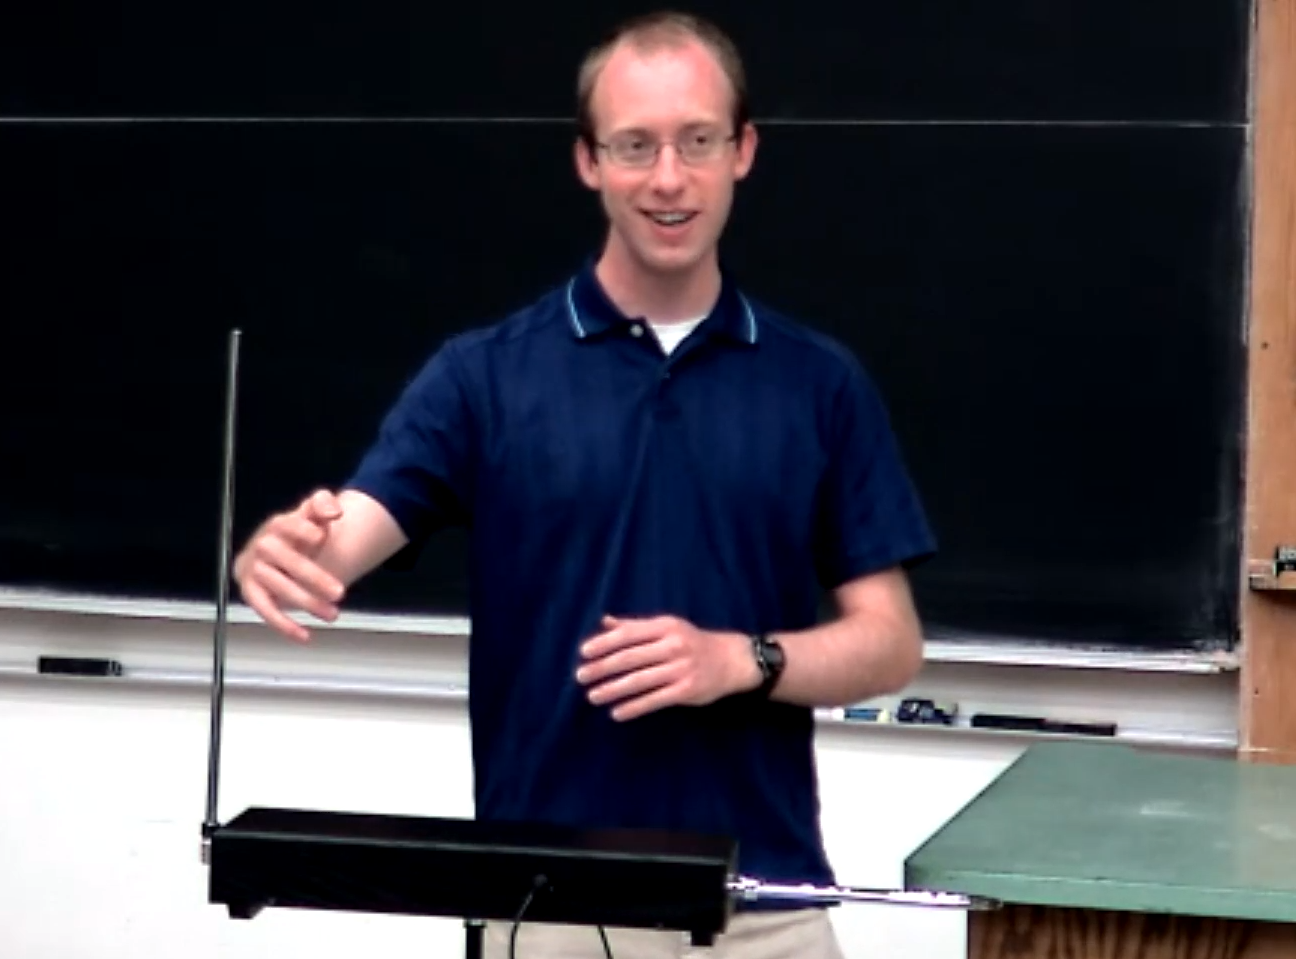 Demonstrating the theremin for the students of PHYS 1240: Sound and Music.